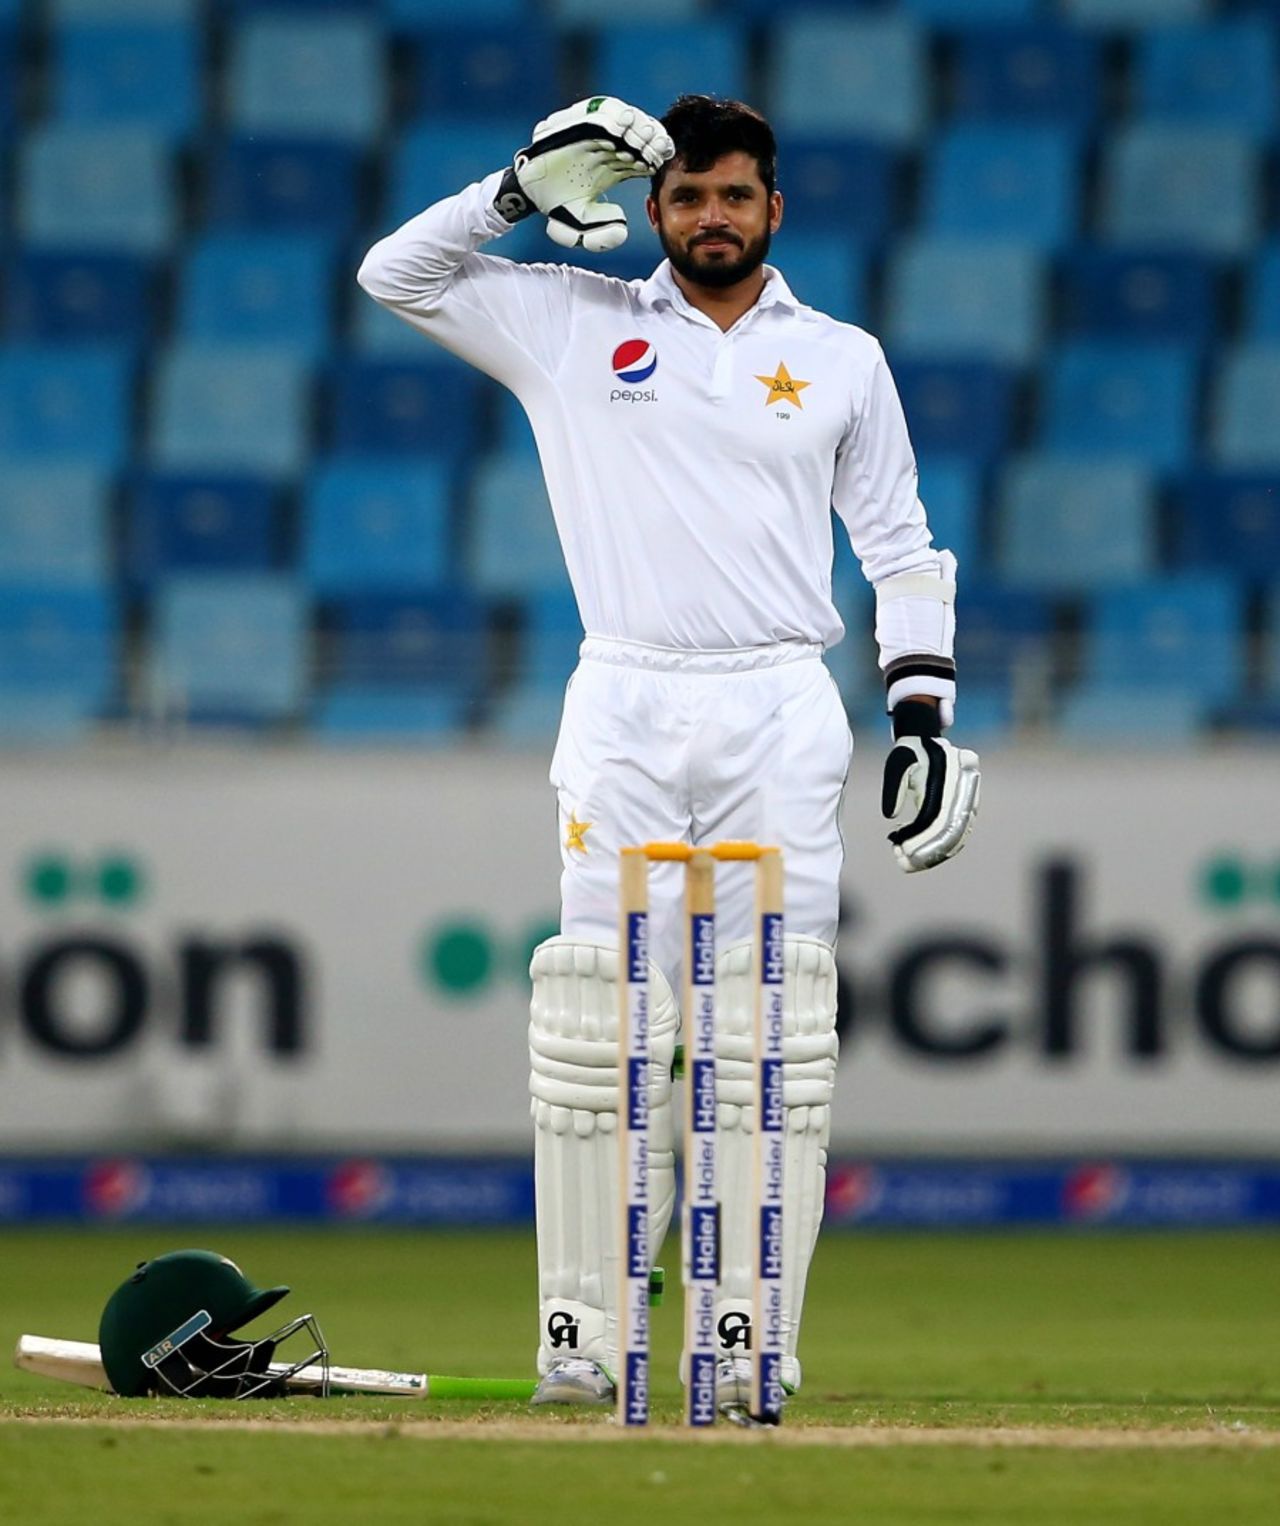 Azhar Ali salutes upon reaching his double century, Pakistan v West Indies, 1st Test, Dubai, 2nd day, October 14, 2016